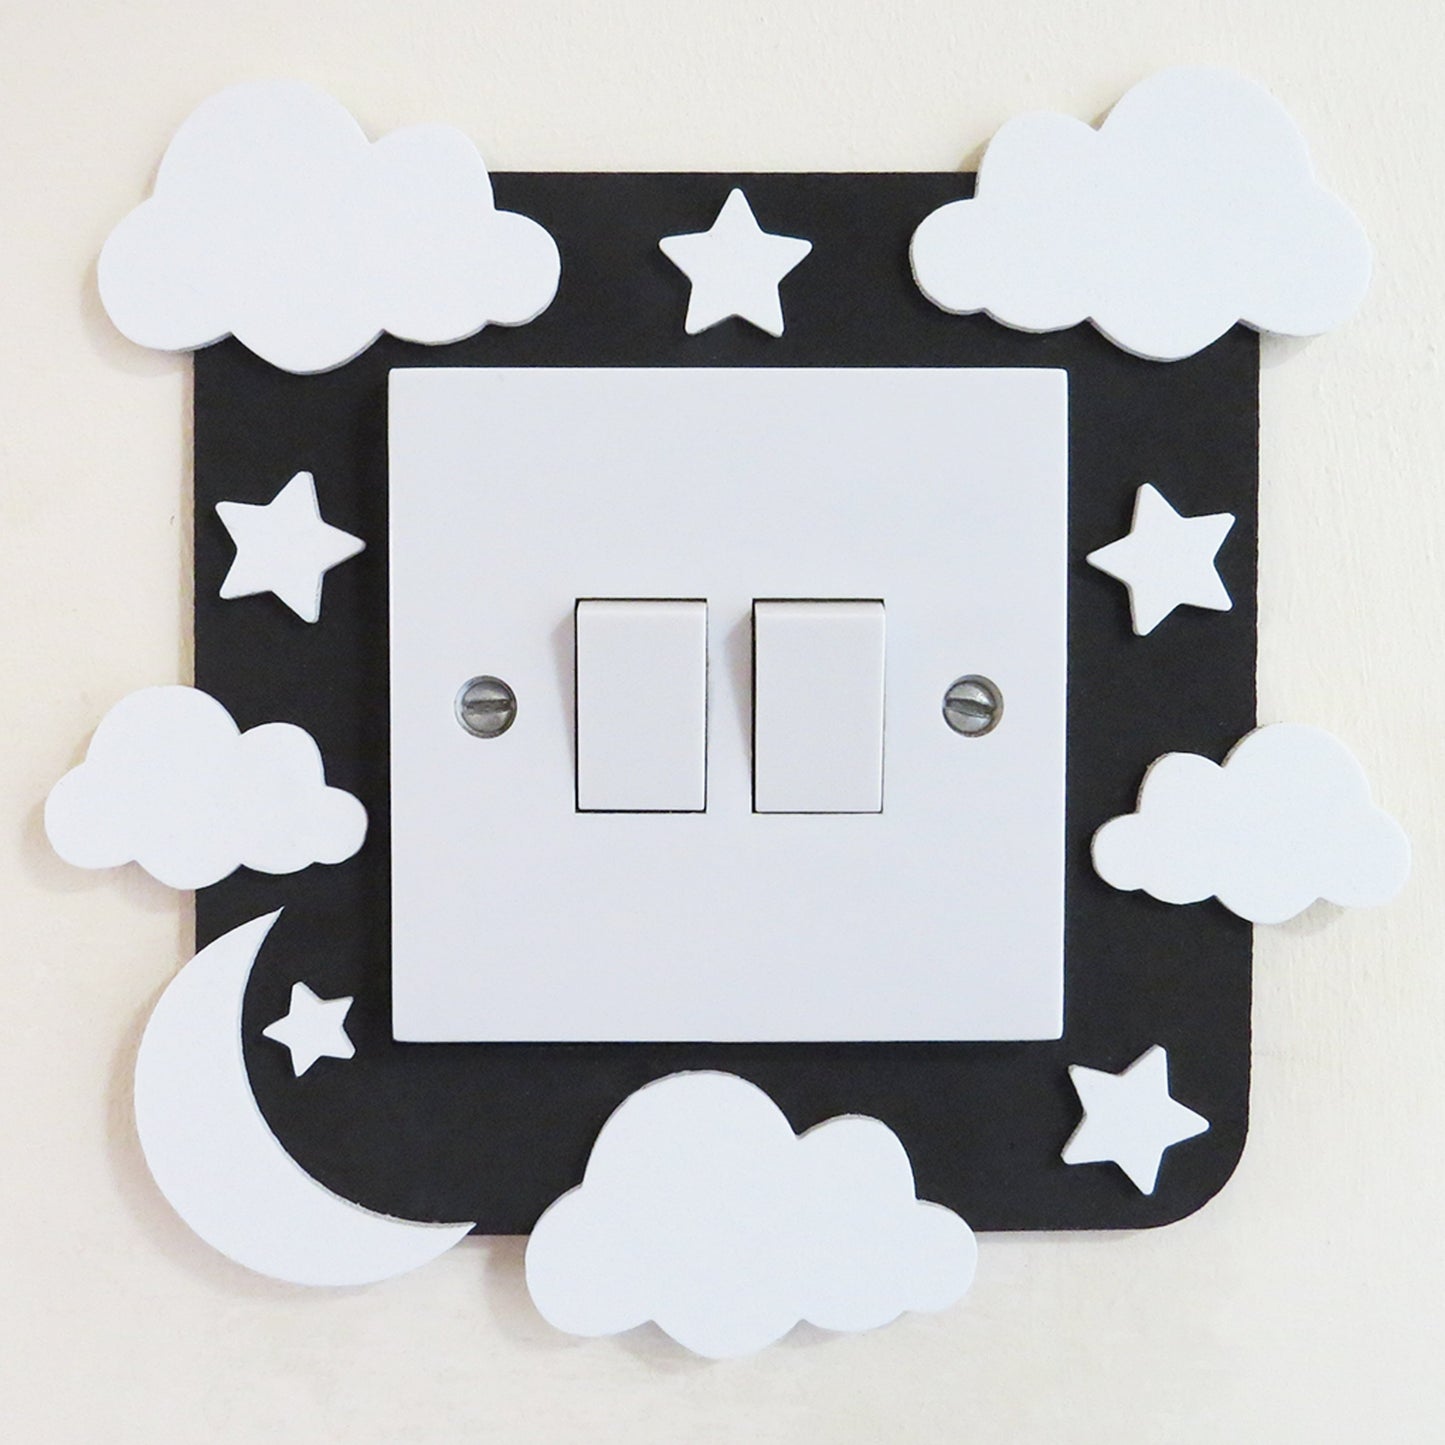 Black craft foam light switch surround designed with clouds, stars  and a moon.